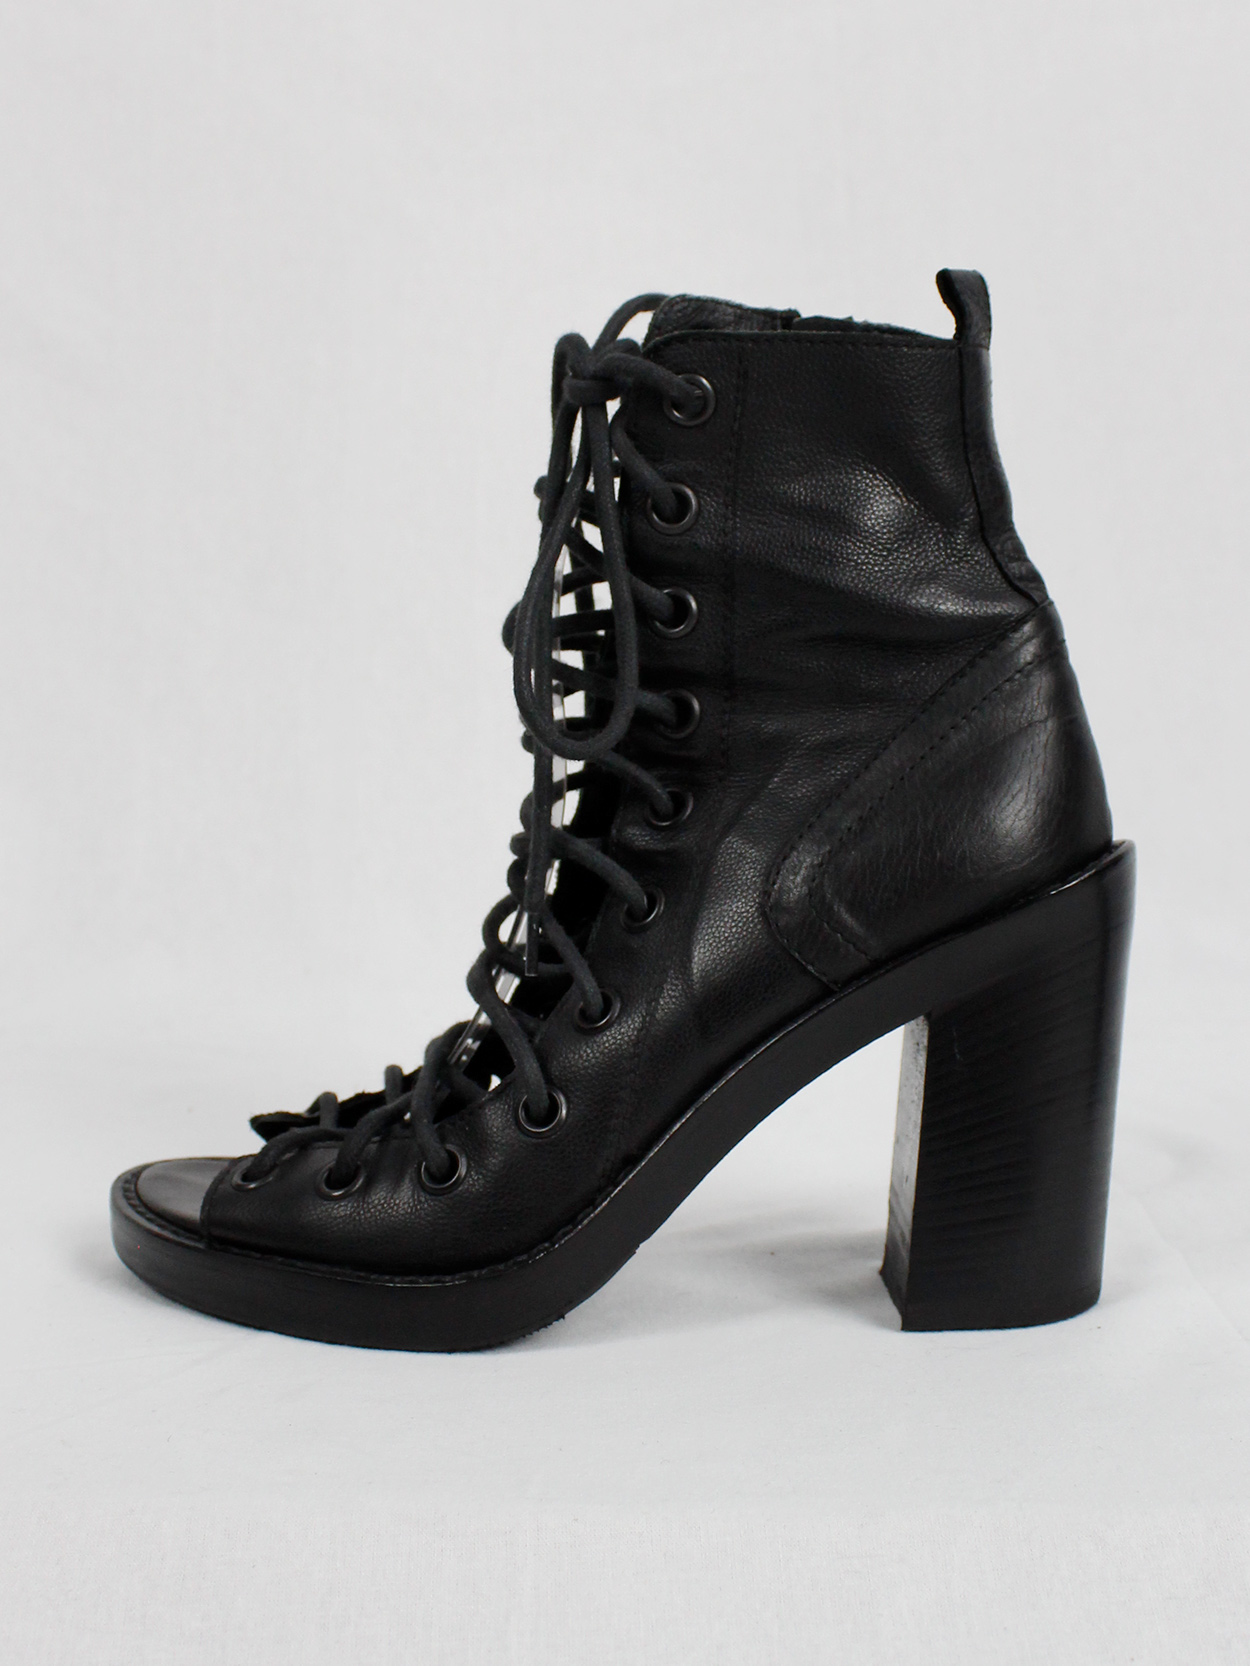 Ann Demeulemeester black high heeled sandals with corset lacing (37.5 ...